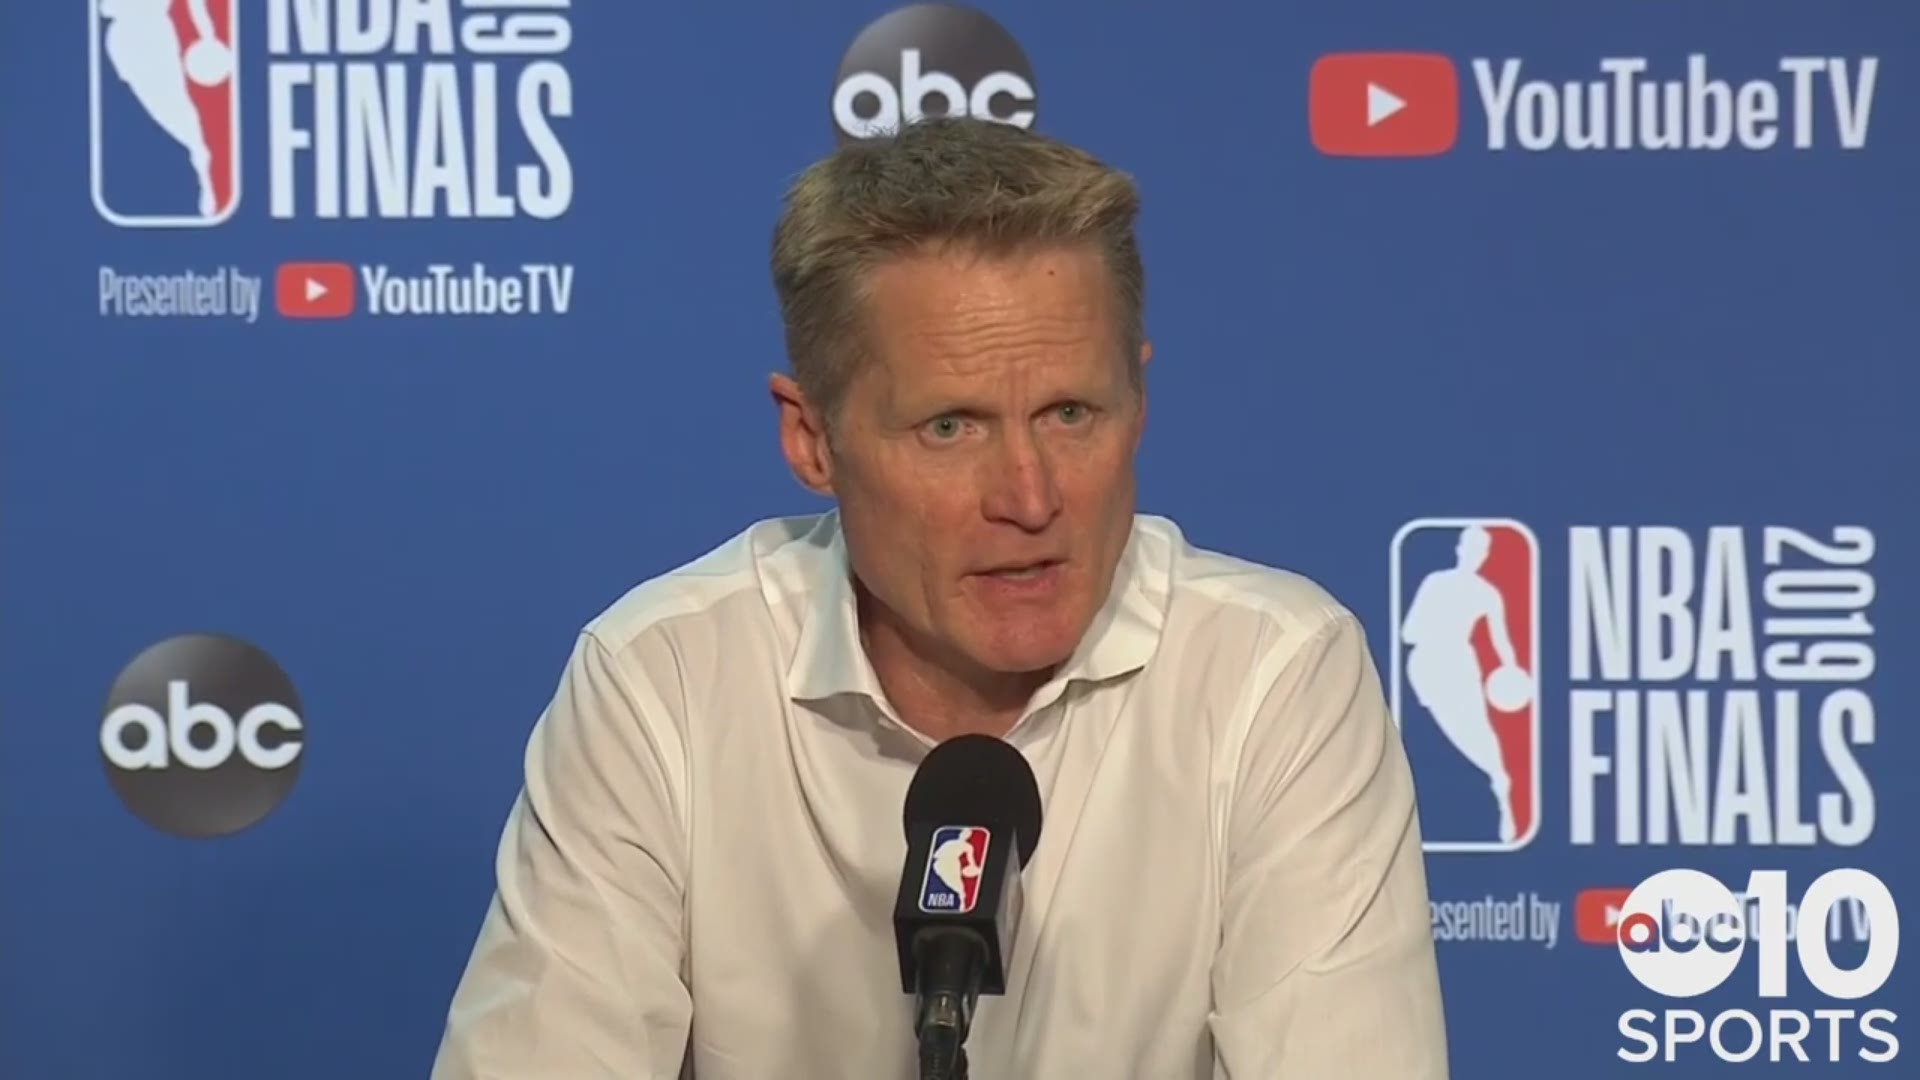 Warriors head coach Steve Kerr talks about the 3-1 series deficit facing Golden State following Friday night's Game 4 loss to the Toronto Raptors in the NBA Finals, and their approach to Monday's Game 5 in Canada where his team will be facing elimination.